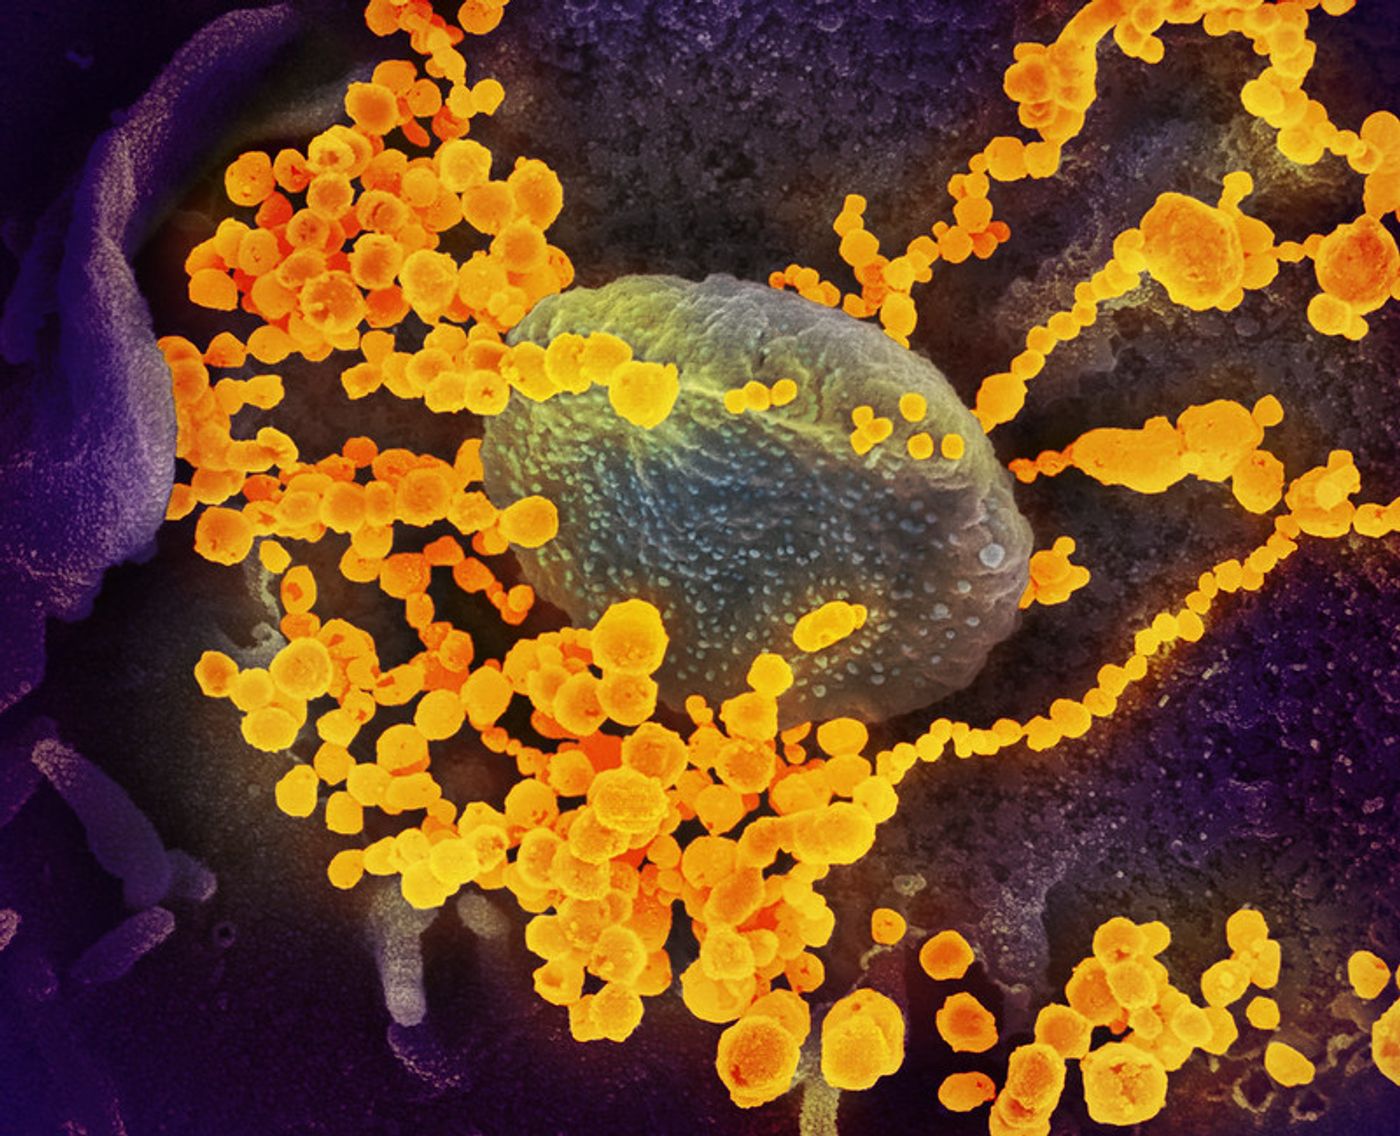 This scanning electron microscope image shows SARS-CoV-2 (round gold objects) emerging from the surface of cells cultured in the lab. SARS-CoV-2, also known as 2019-nCoV, is the virus that causes COVID-19. The virus shown was isolated from a patient in the U.S. / Credit: NIAID-RML